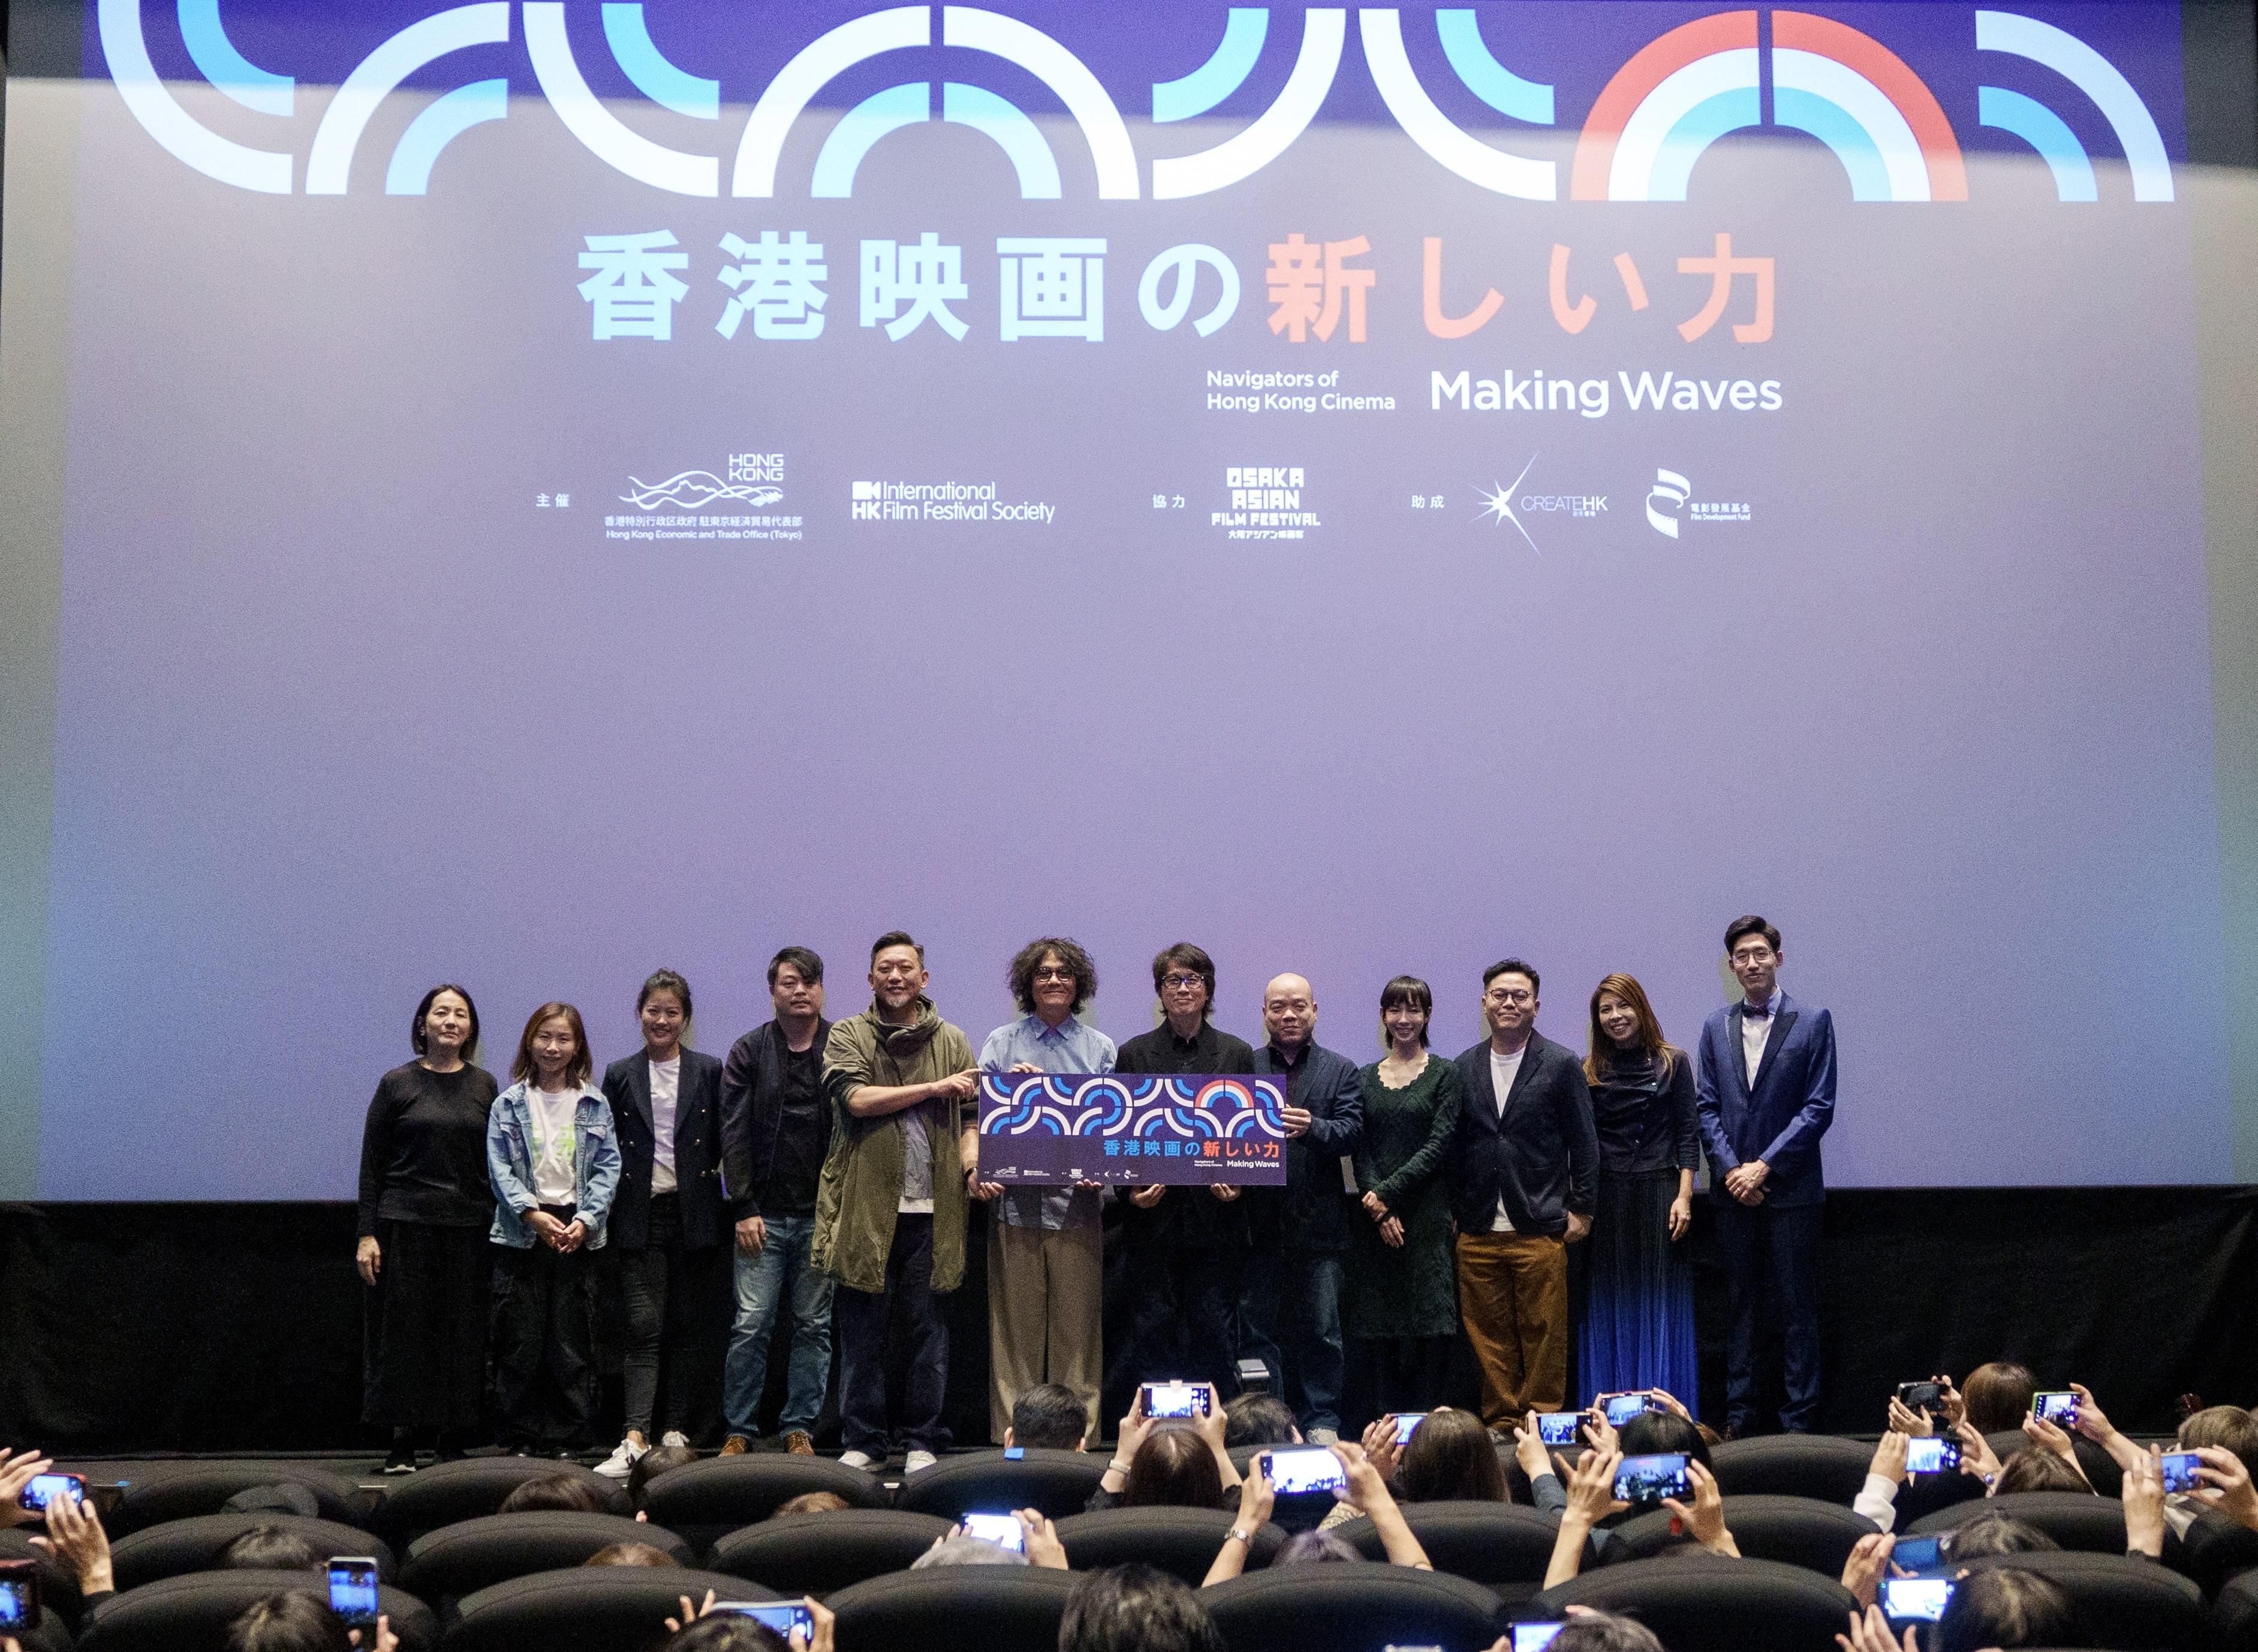 The Hong Kong Economic and Trade Office in Tokyo and the Hong Kong International Film Festival Society are jointly presenting a Hong Kong film festival "Making Waves - Navigators of Hong Kong Cinema" in Tokyo, Japan, showcasing a selection of new and restored Hong Kong films from today (November 2) to November 5. Photo shows (from left) the Head of Events and Marketing of the Hong Kong International Film Festival Society Limited, Ms Lemon Lim; "Back Home" producer Mani Man; "Where the Wind Blows" screenwriter Sun Fei and director Philip Yung; "Mad Fate" director Soi Cheang and actor Gordon Lam; "A Guilty Conscience" actor Dayo Wong and director Jack Ng; "Once in a Blue Moon" actress Gladys Li and director Andy Lo; the Principal Hong Kong Economic and Trade Representative (Tokyo), Miss Winsome Au; and the Deputy Hong Kong Economic and Trade Representative (Tokyo), Mr Leo Tze, at the opening ceremony today.